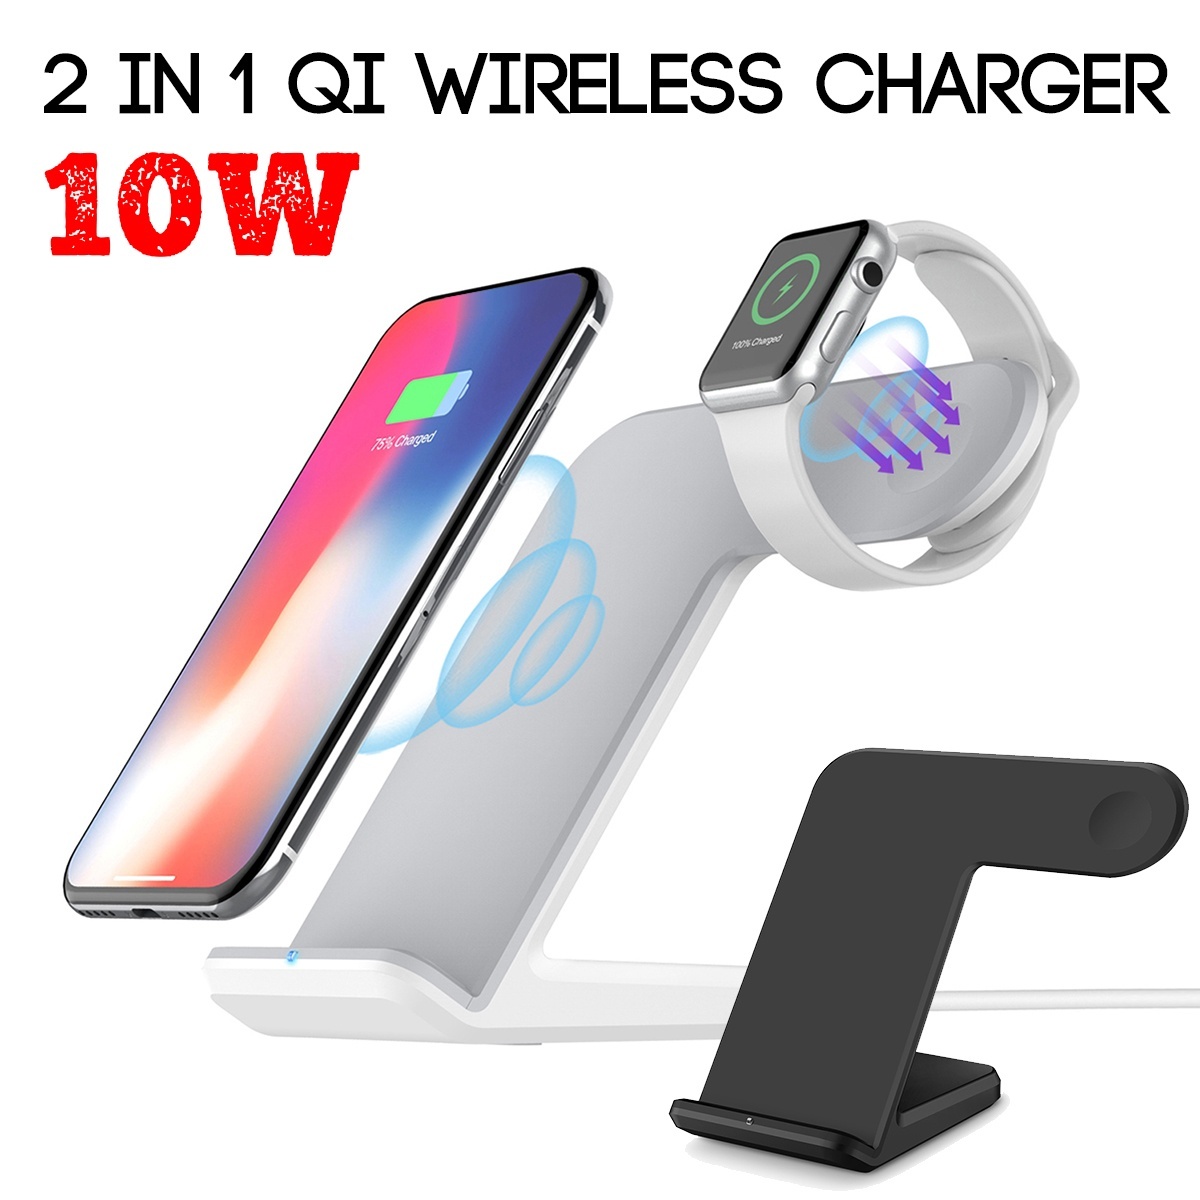 10W-Qi-Phone-Docks-Wireless-Fast-Charger-Charging-Station-Dock-Stand-for-Samsung-S8-S9-for-iPhone-1388880